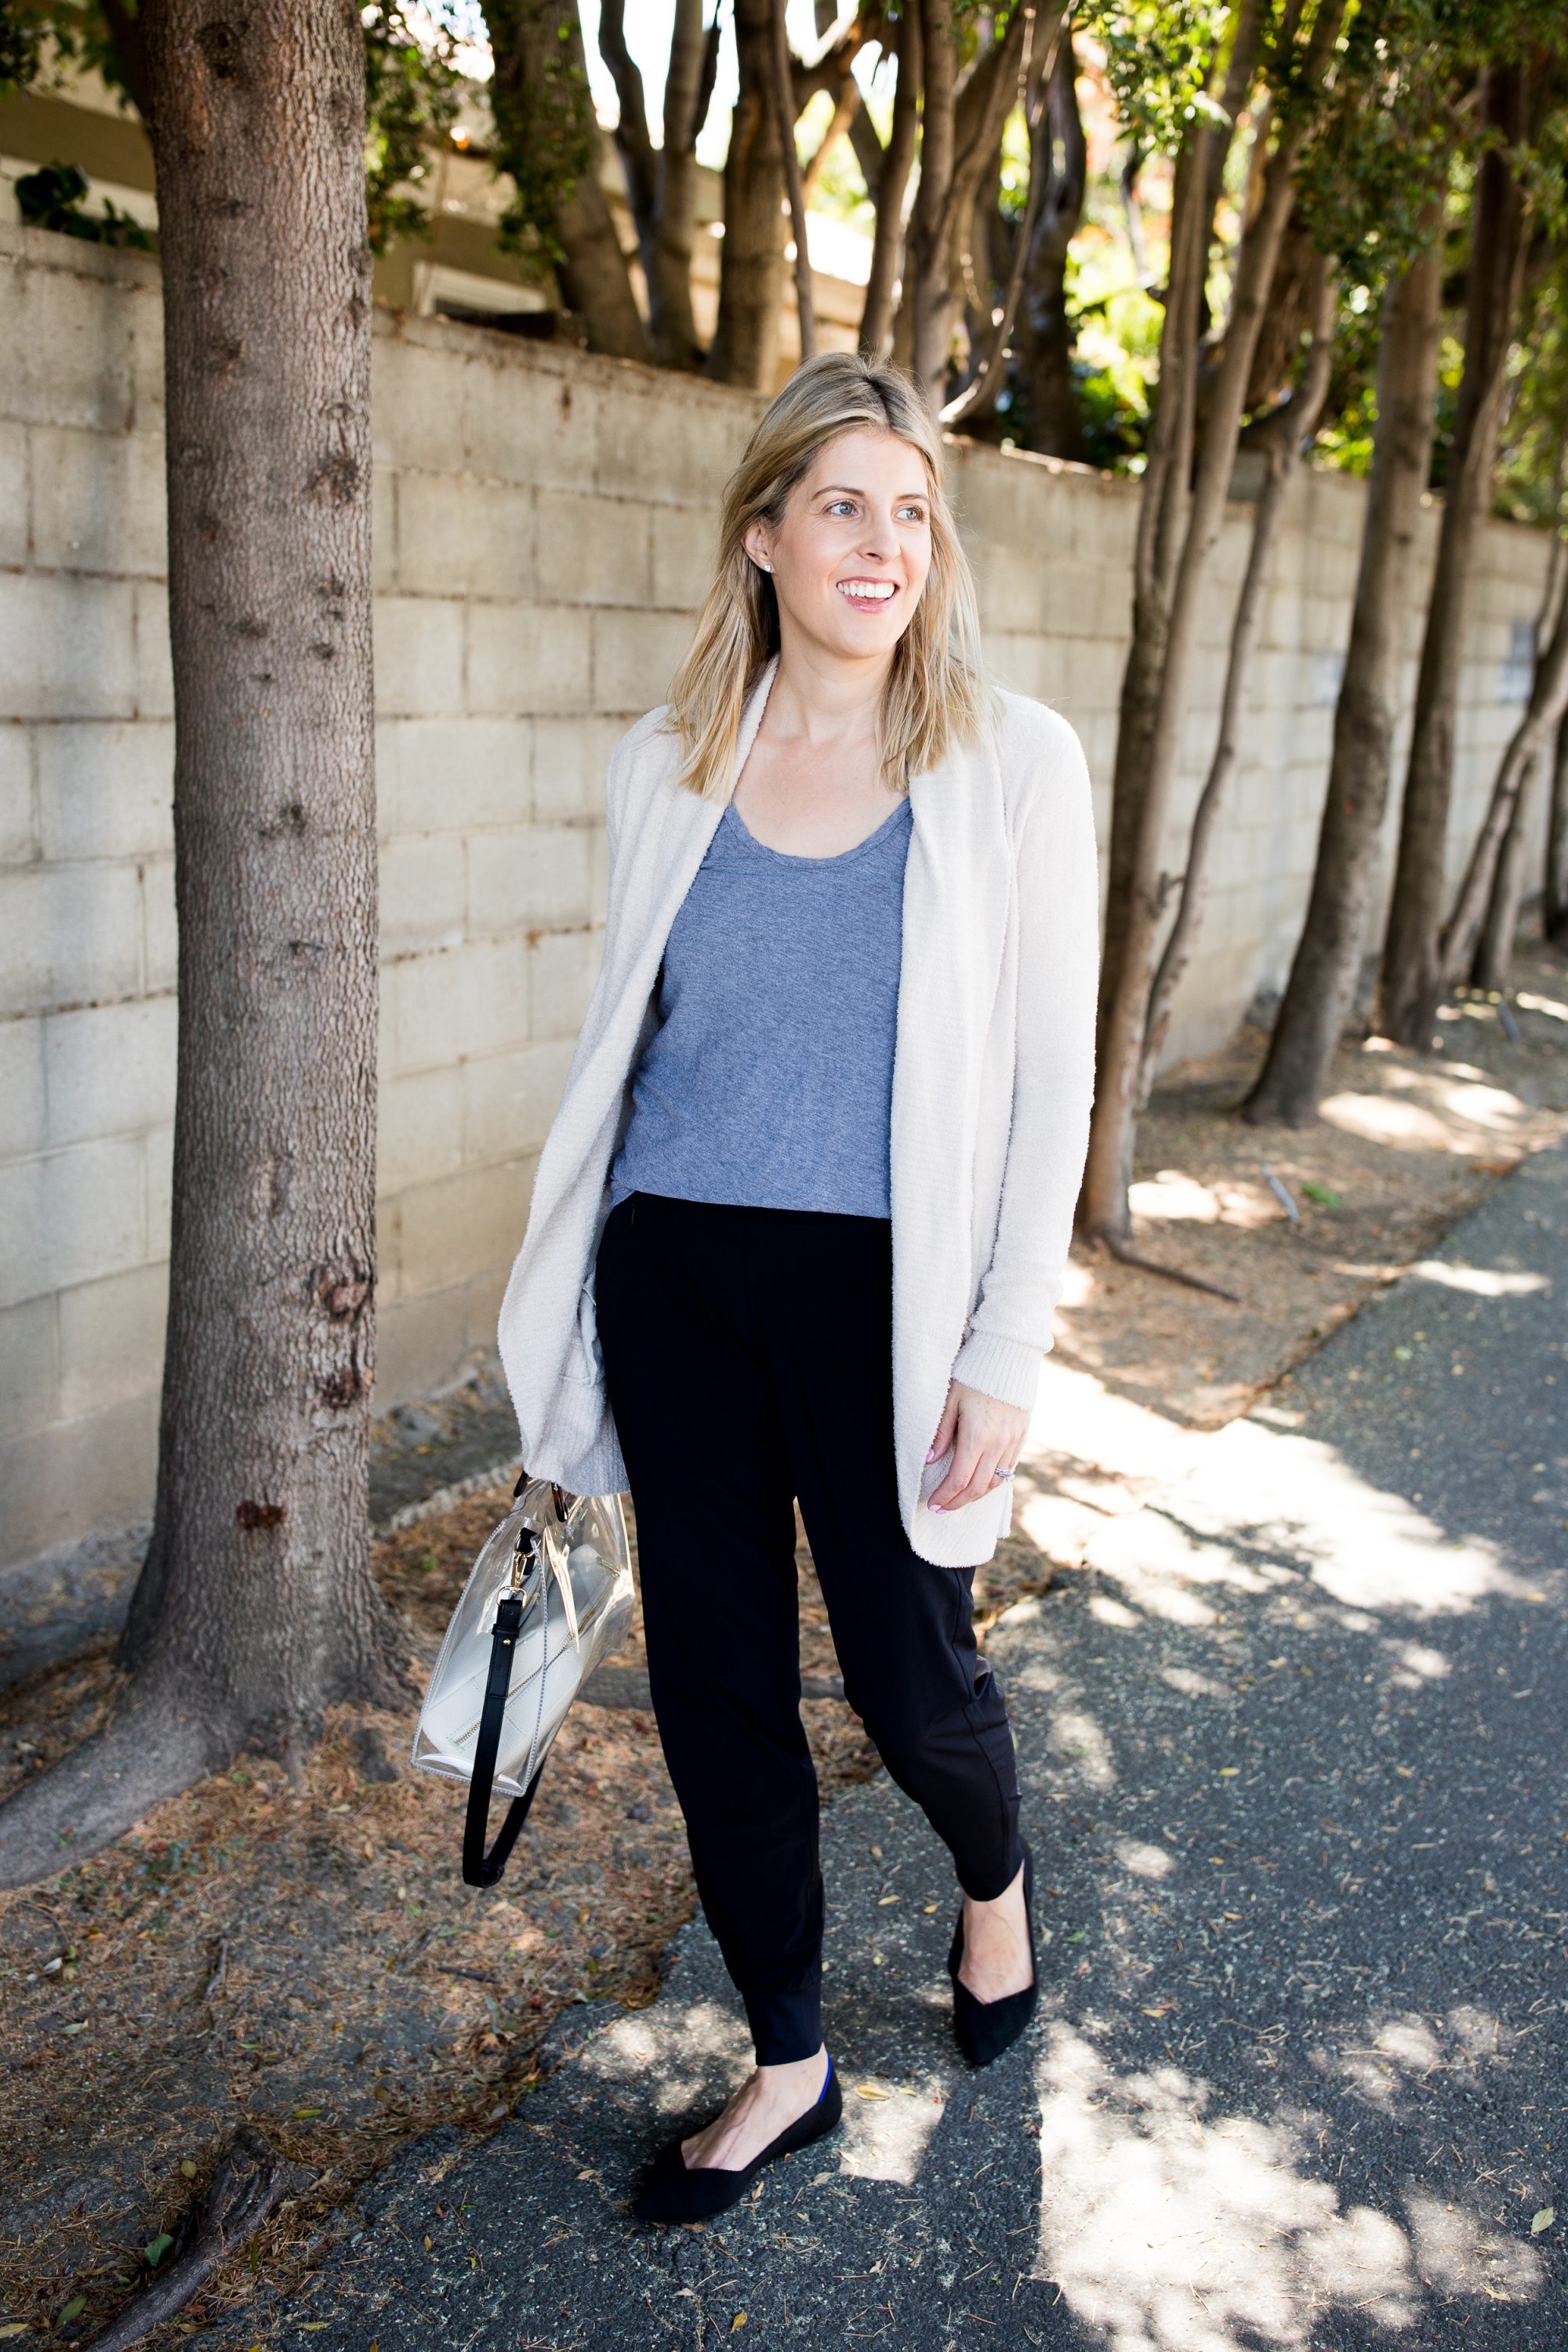 How to Style and Dress Up Sweatpants | POPSUGAR Fashion